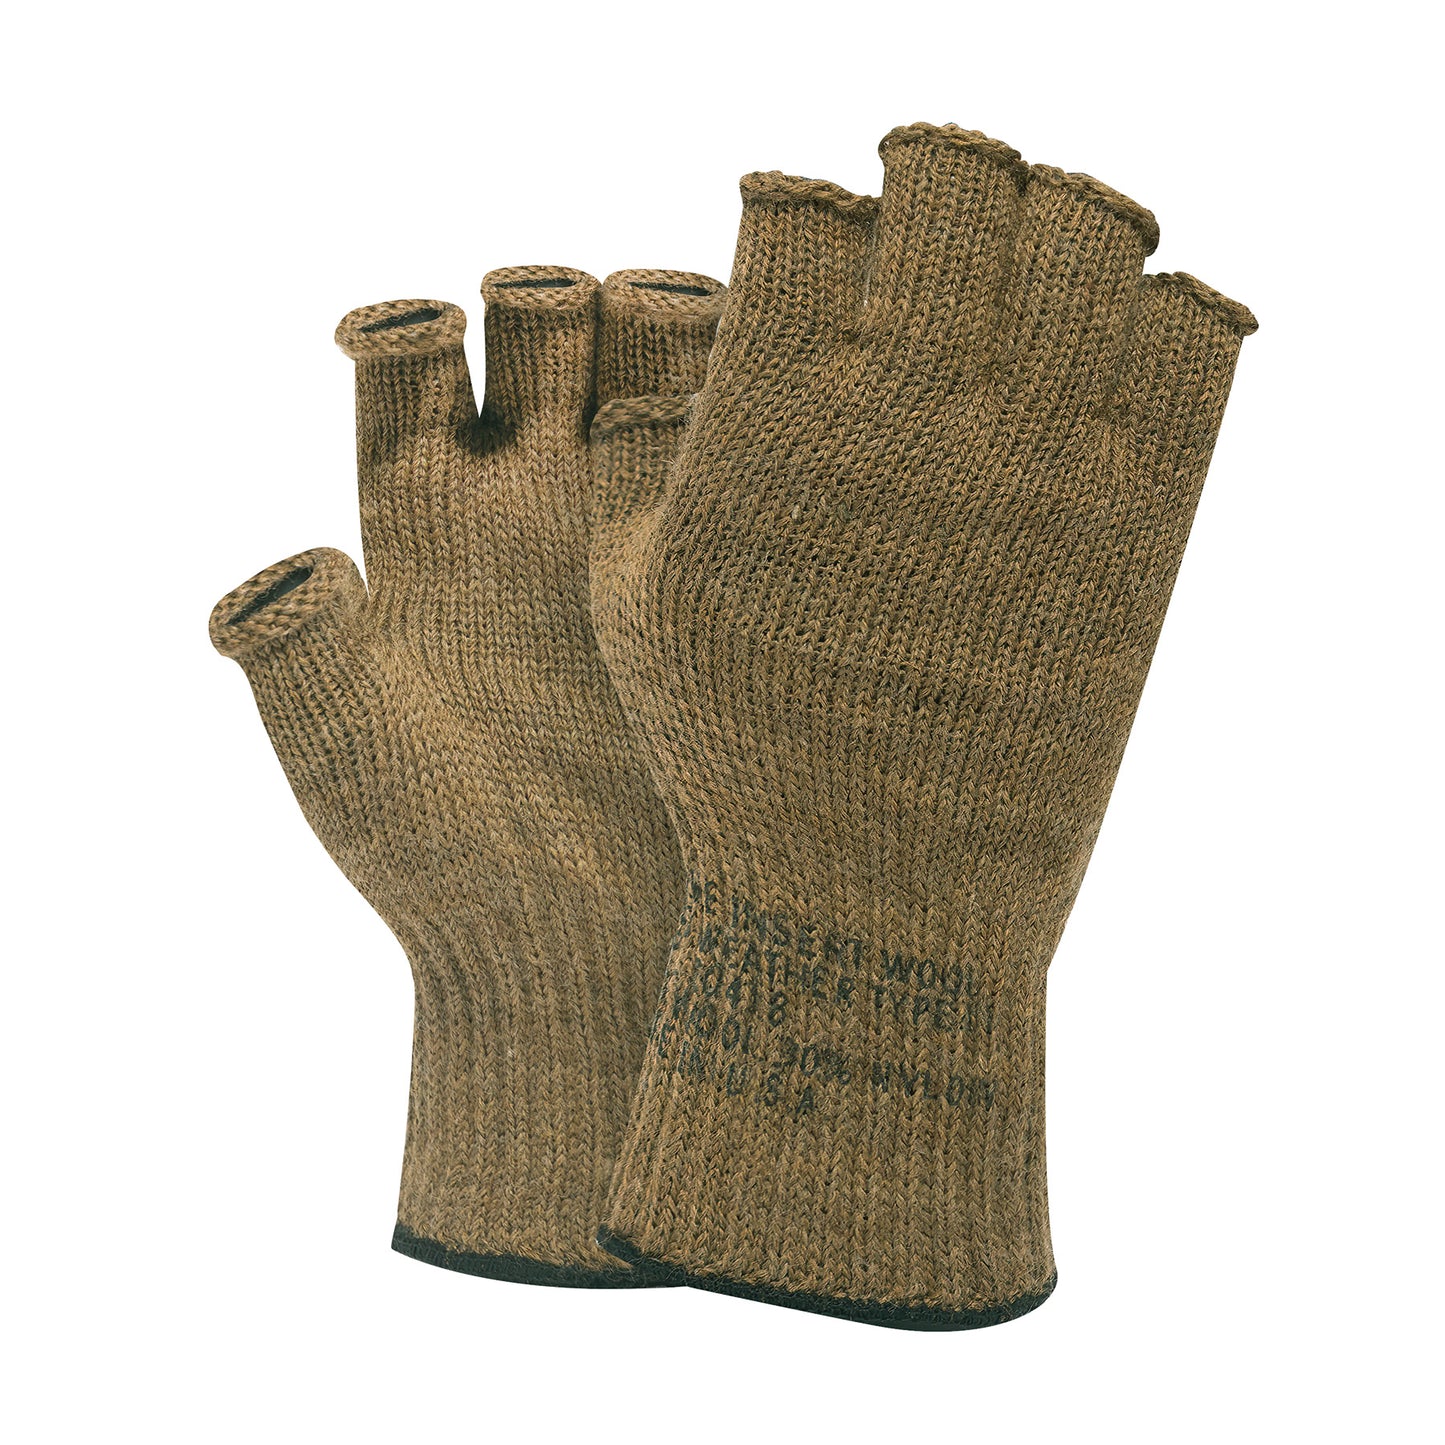 Fingerless Wool Gloves Genuine GI Tactical Army Glove Liner Made In USA